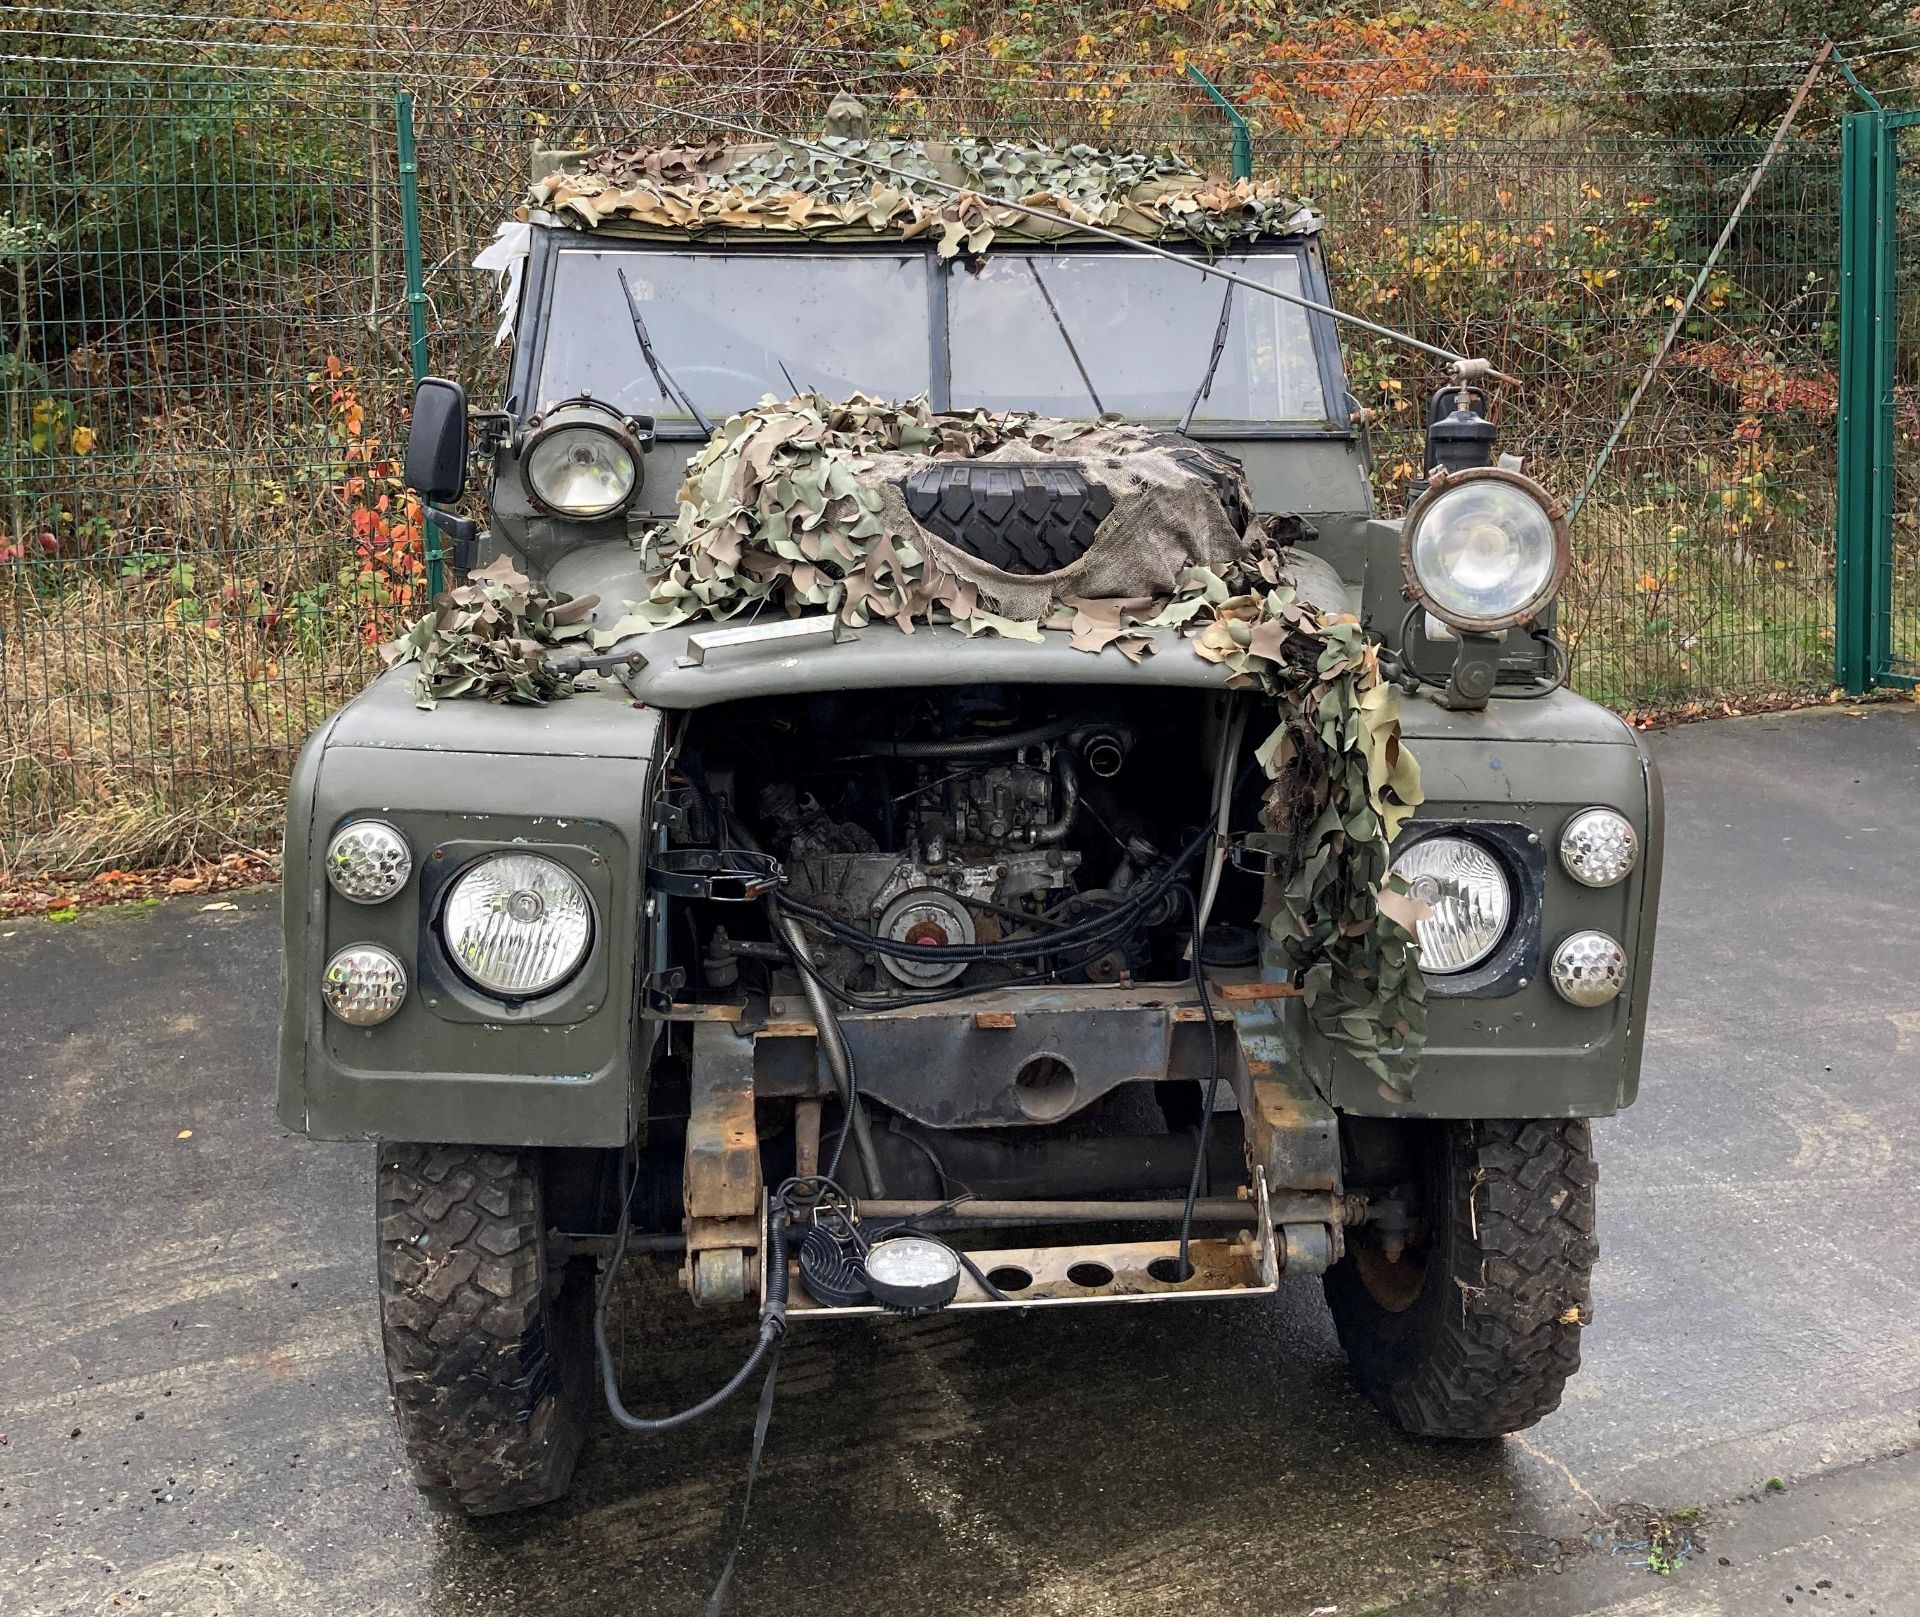 LAND ROVER LIGHT 4X4 UTILITY 2500cc - Diesel - Camouflage. - Image 2 of 9